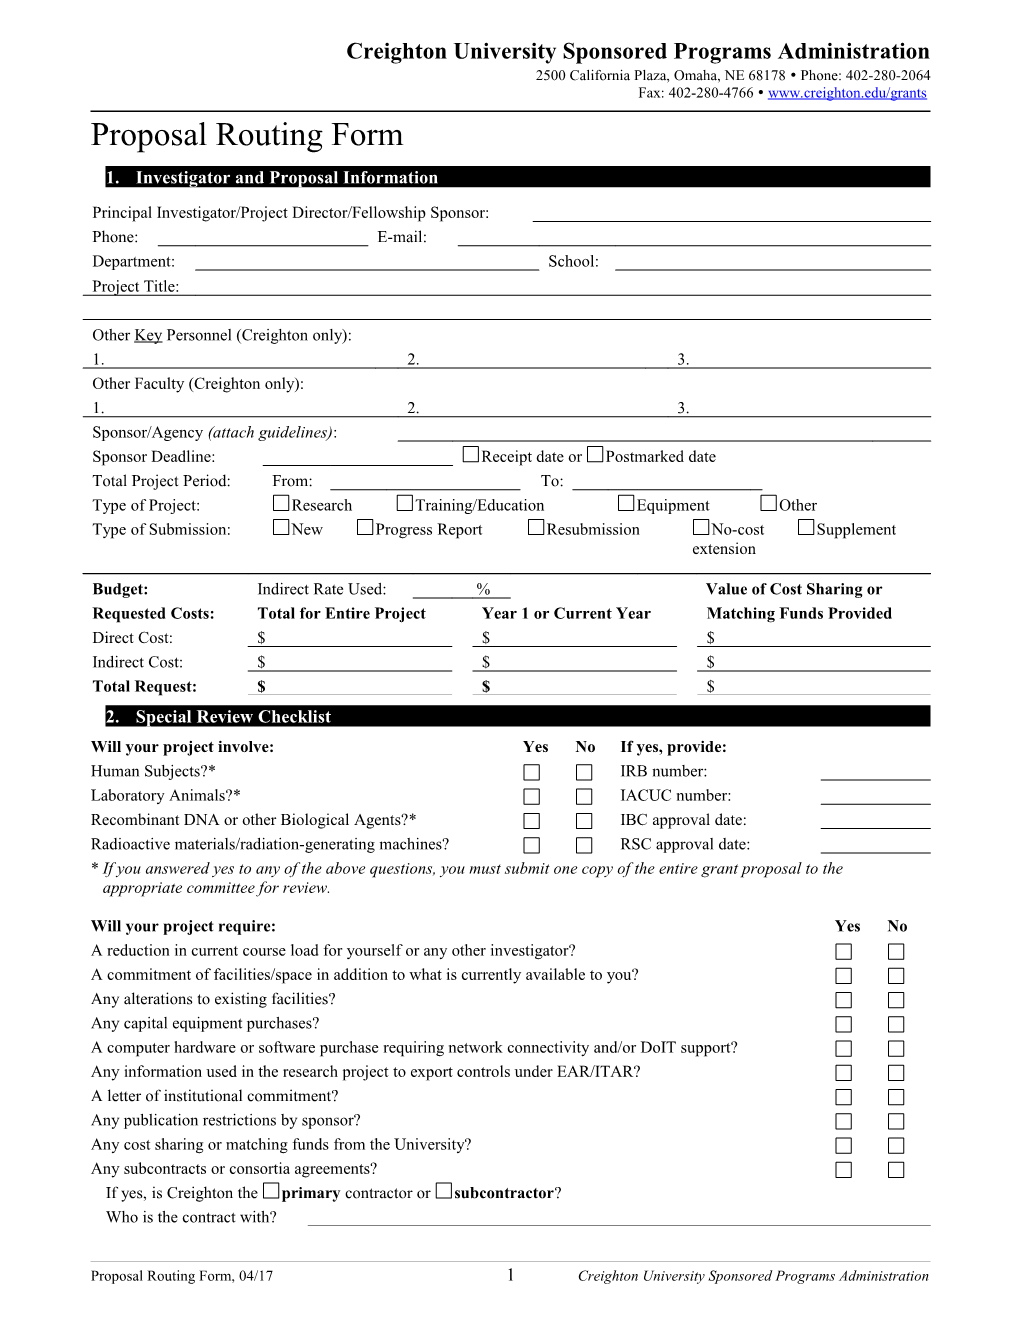 Proposal Routing Form